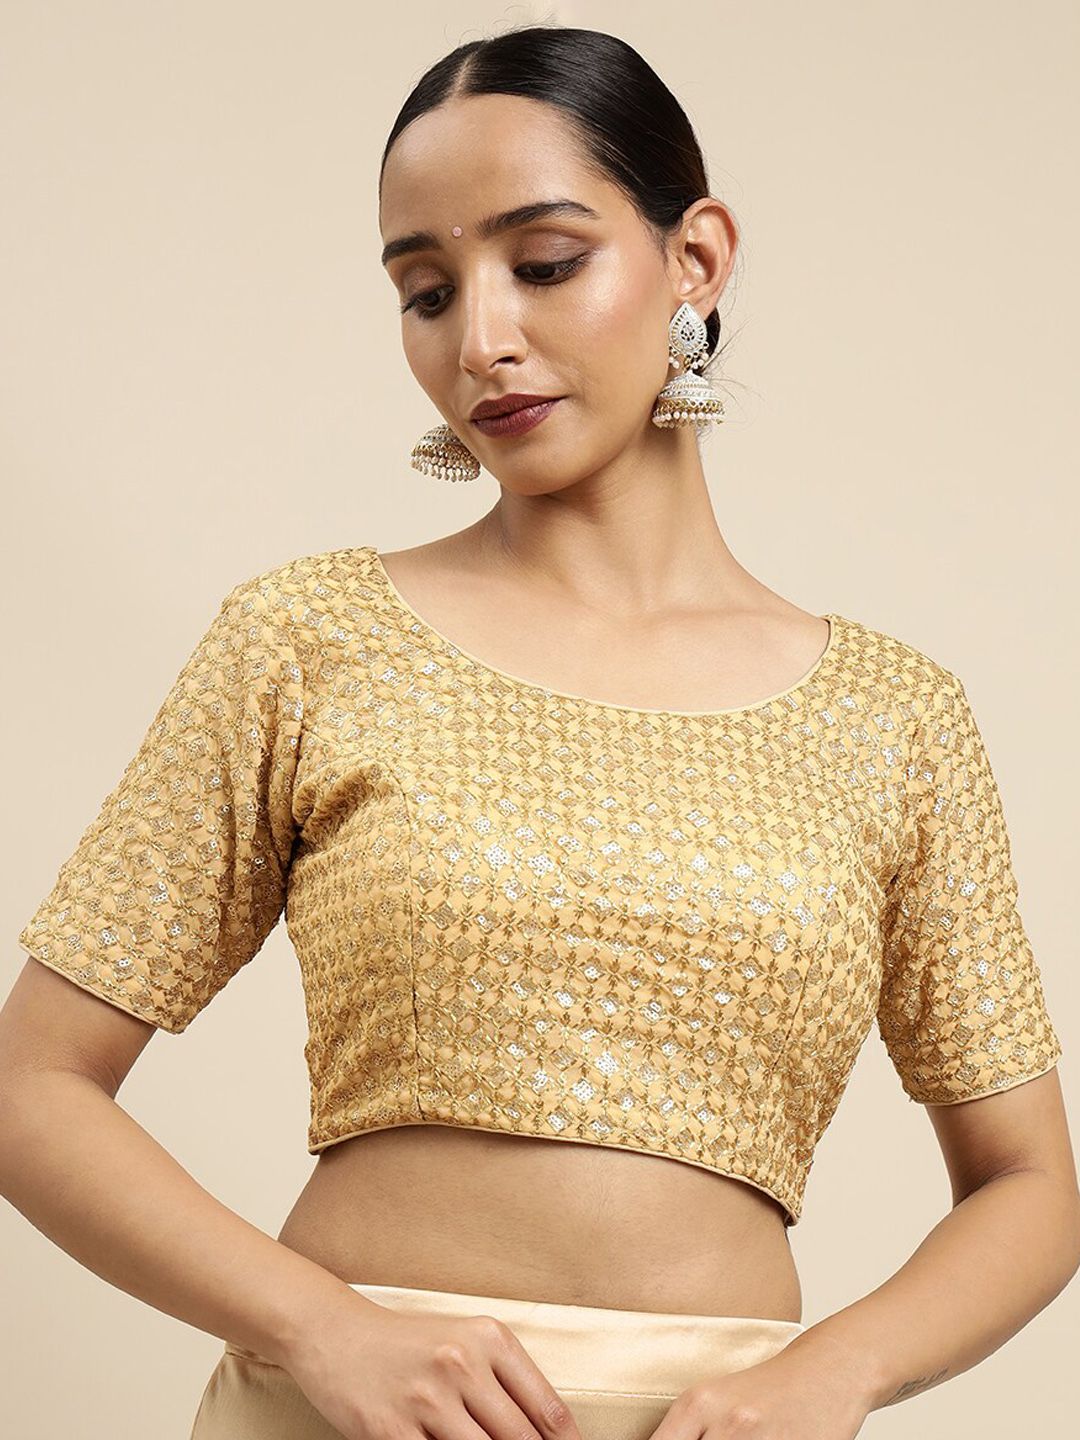 MIMOSA Brown & Gold-Colored Embroidered Saree Blouse Price in India